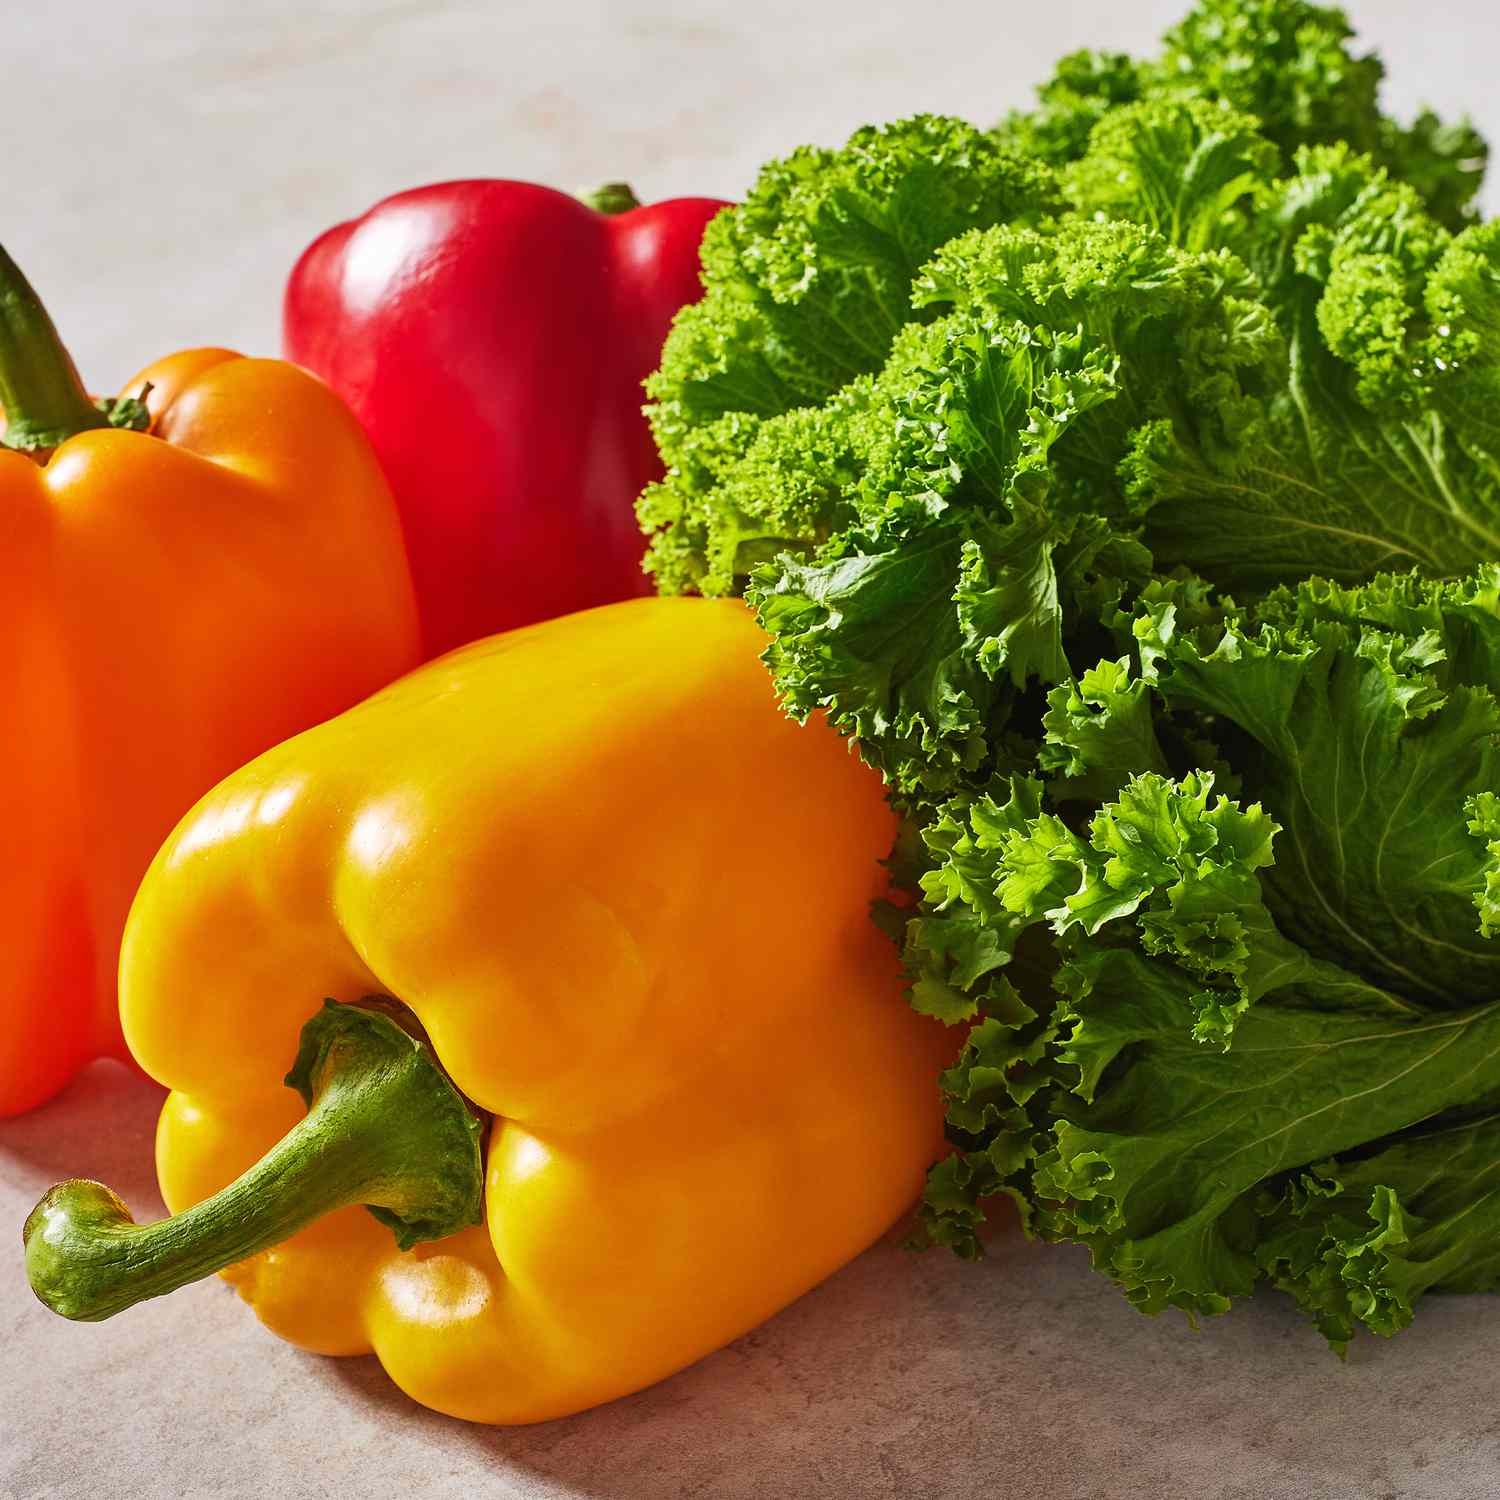 a grouping of red, orange, and yellow peppers with kale